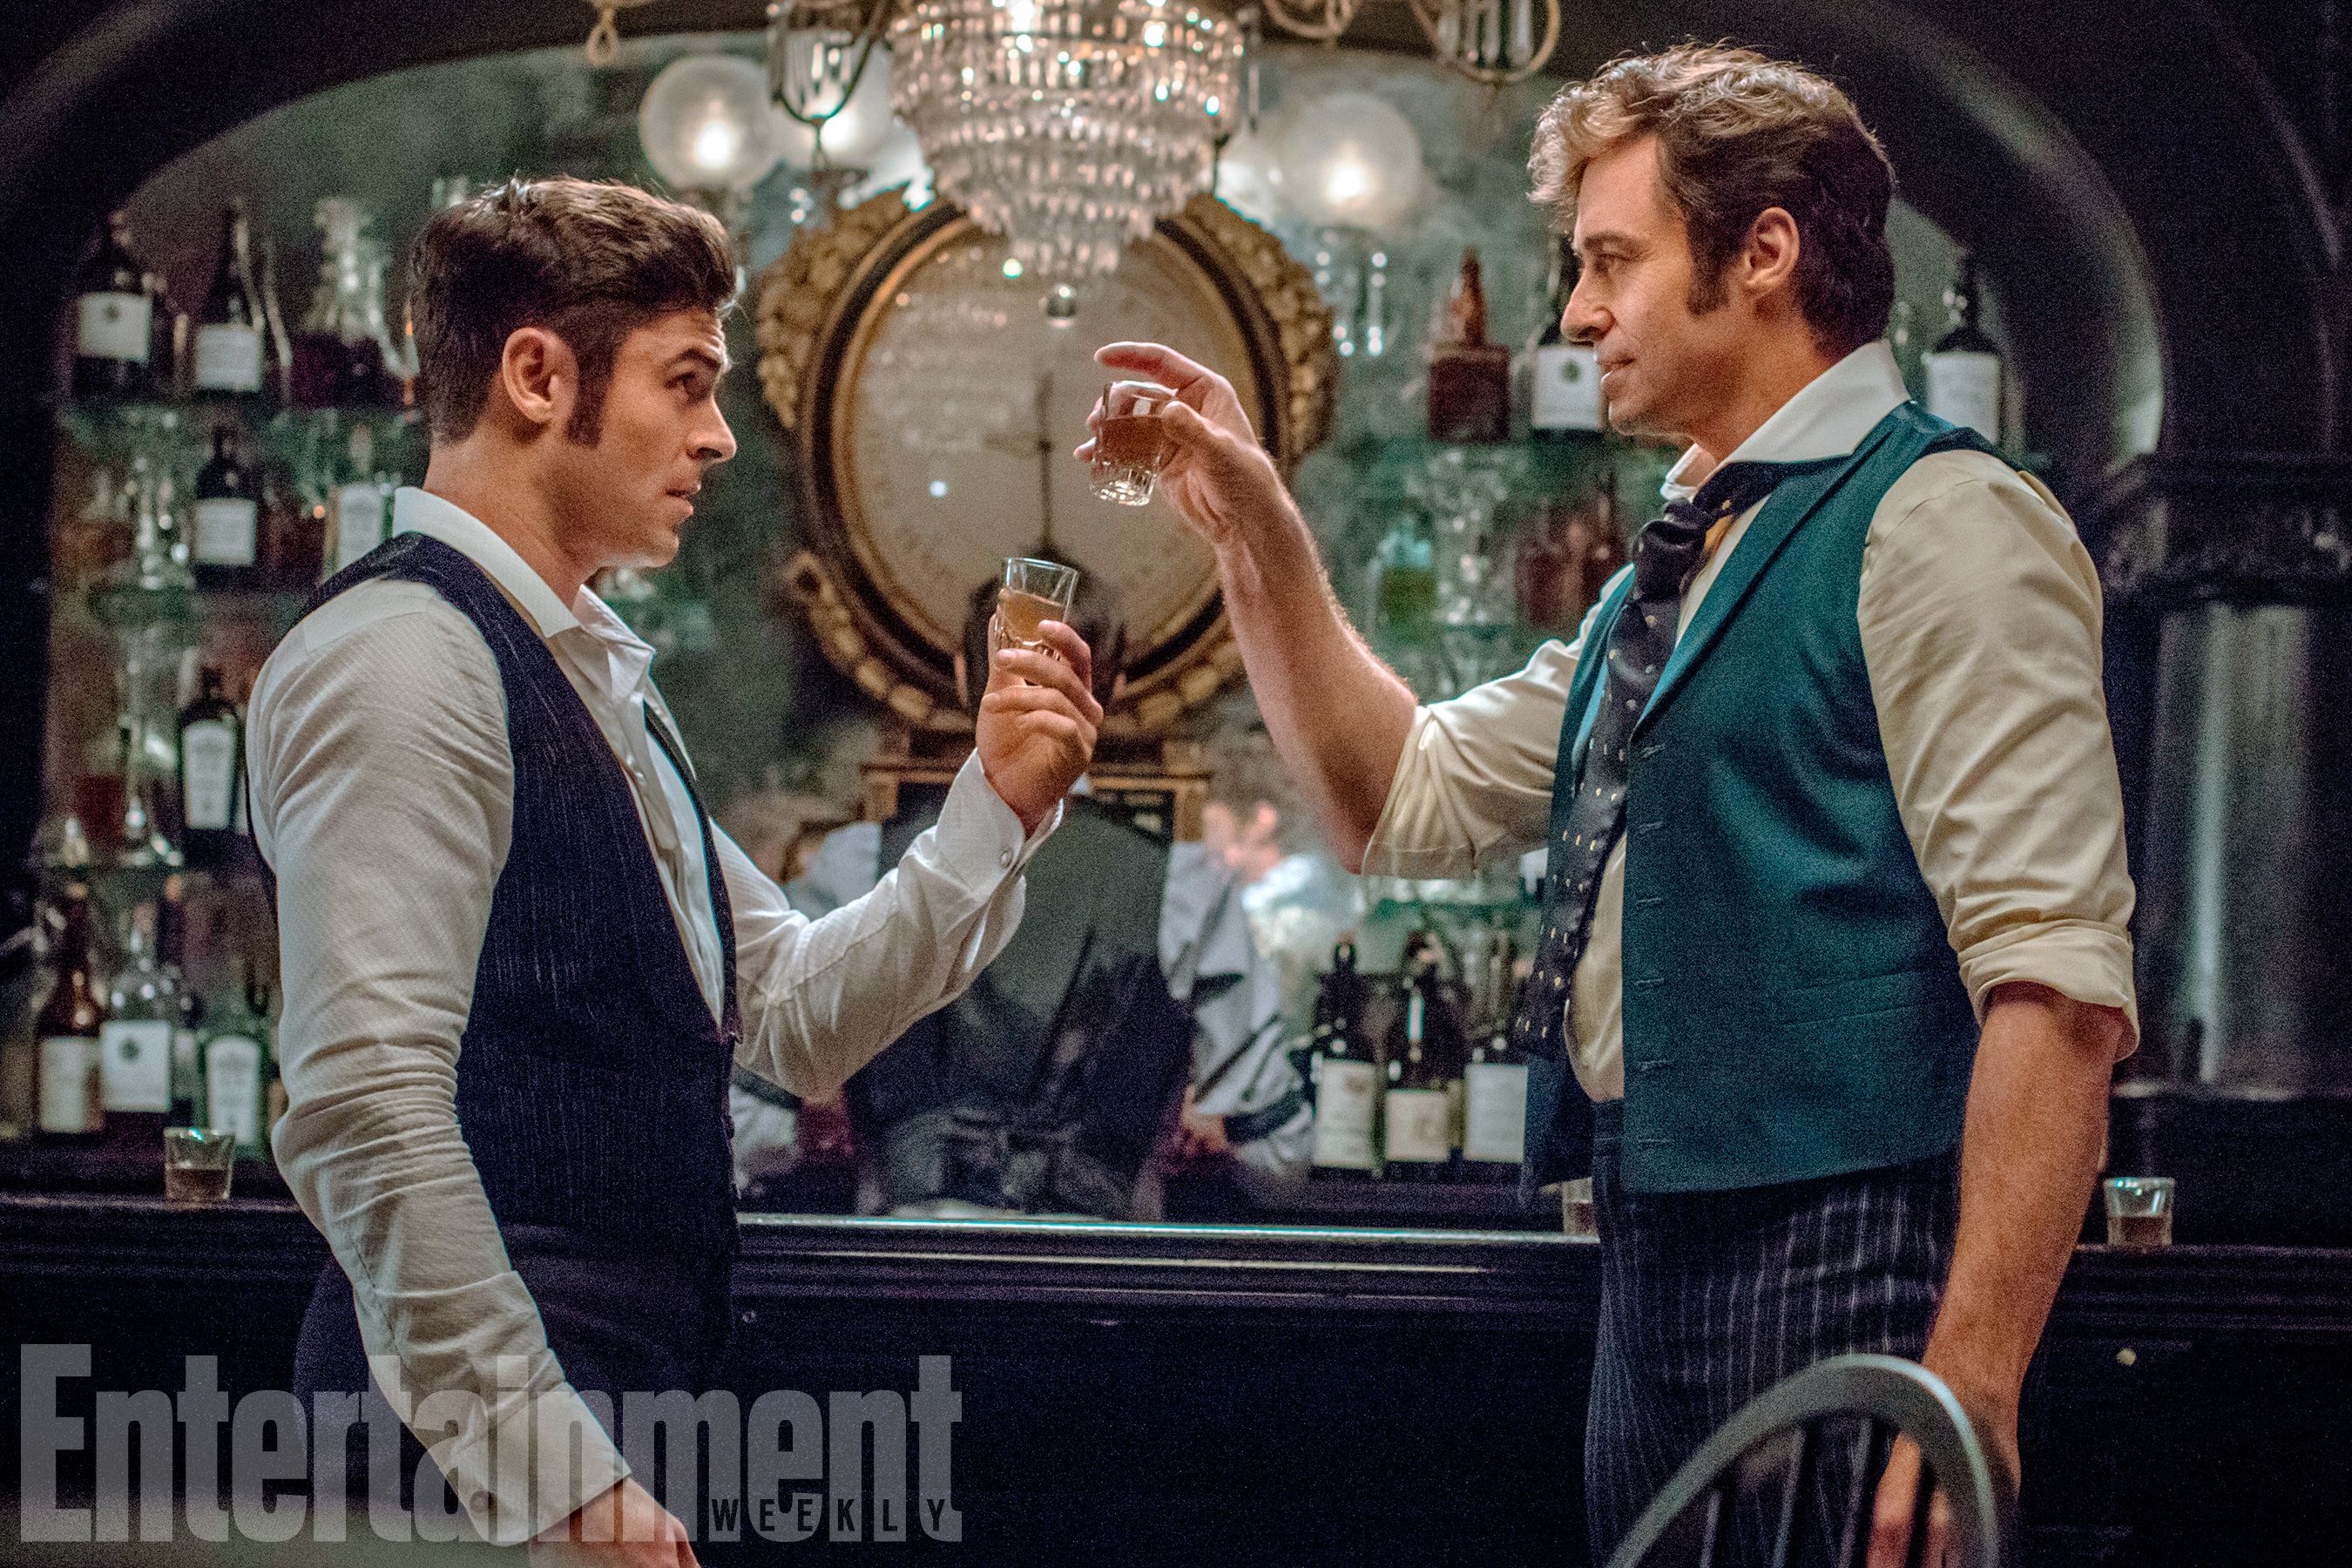 Zac Efron and Hugh Jackman have sideburns for DAYS in the first